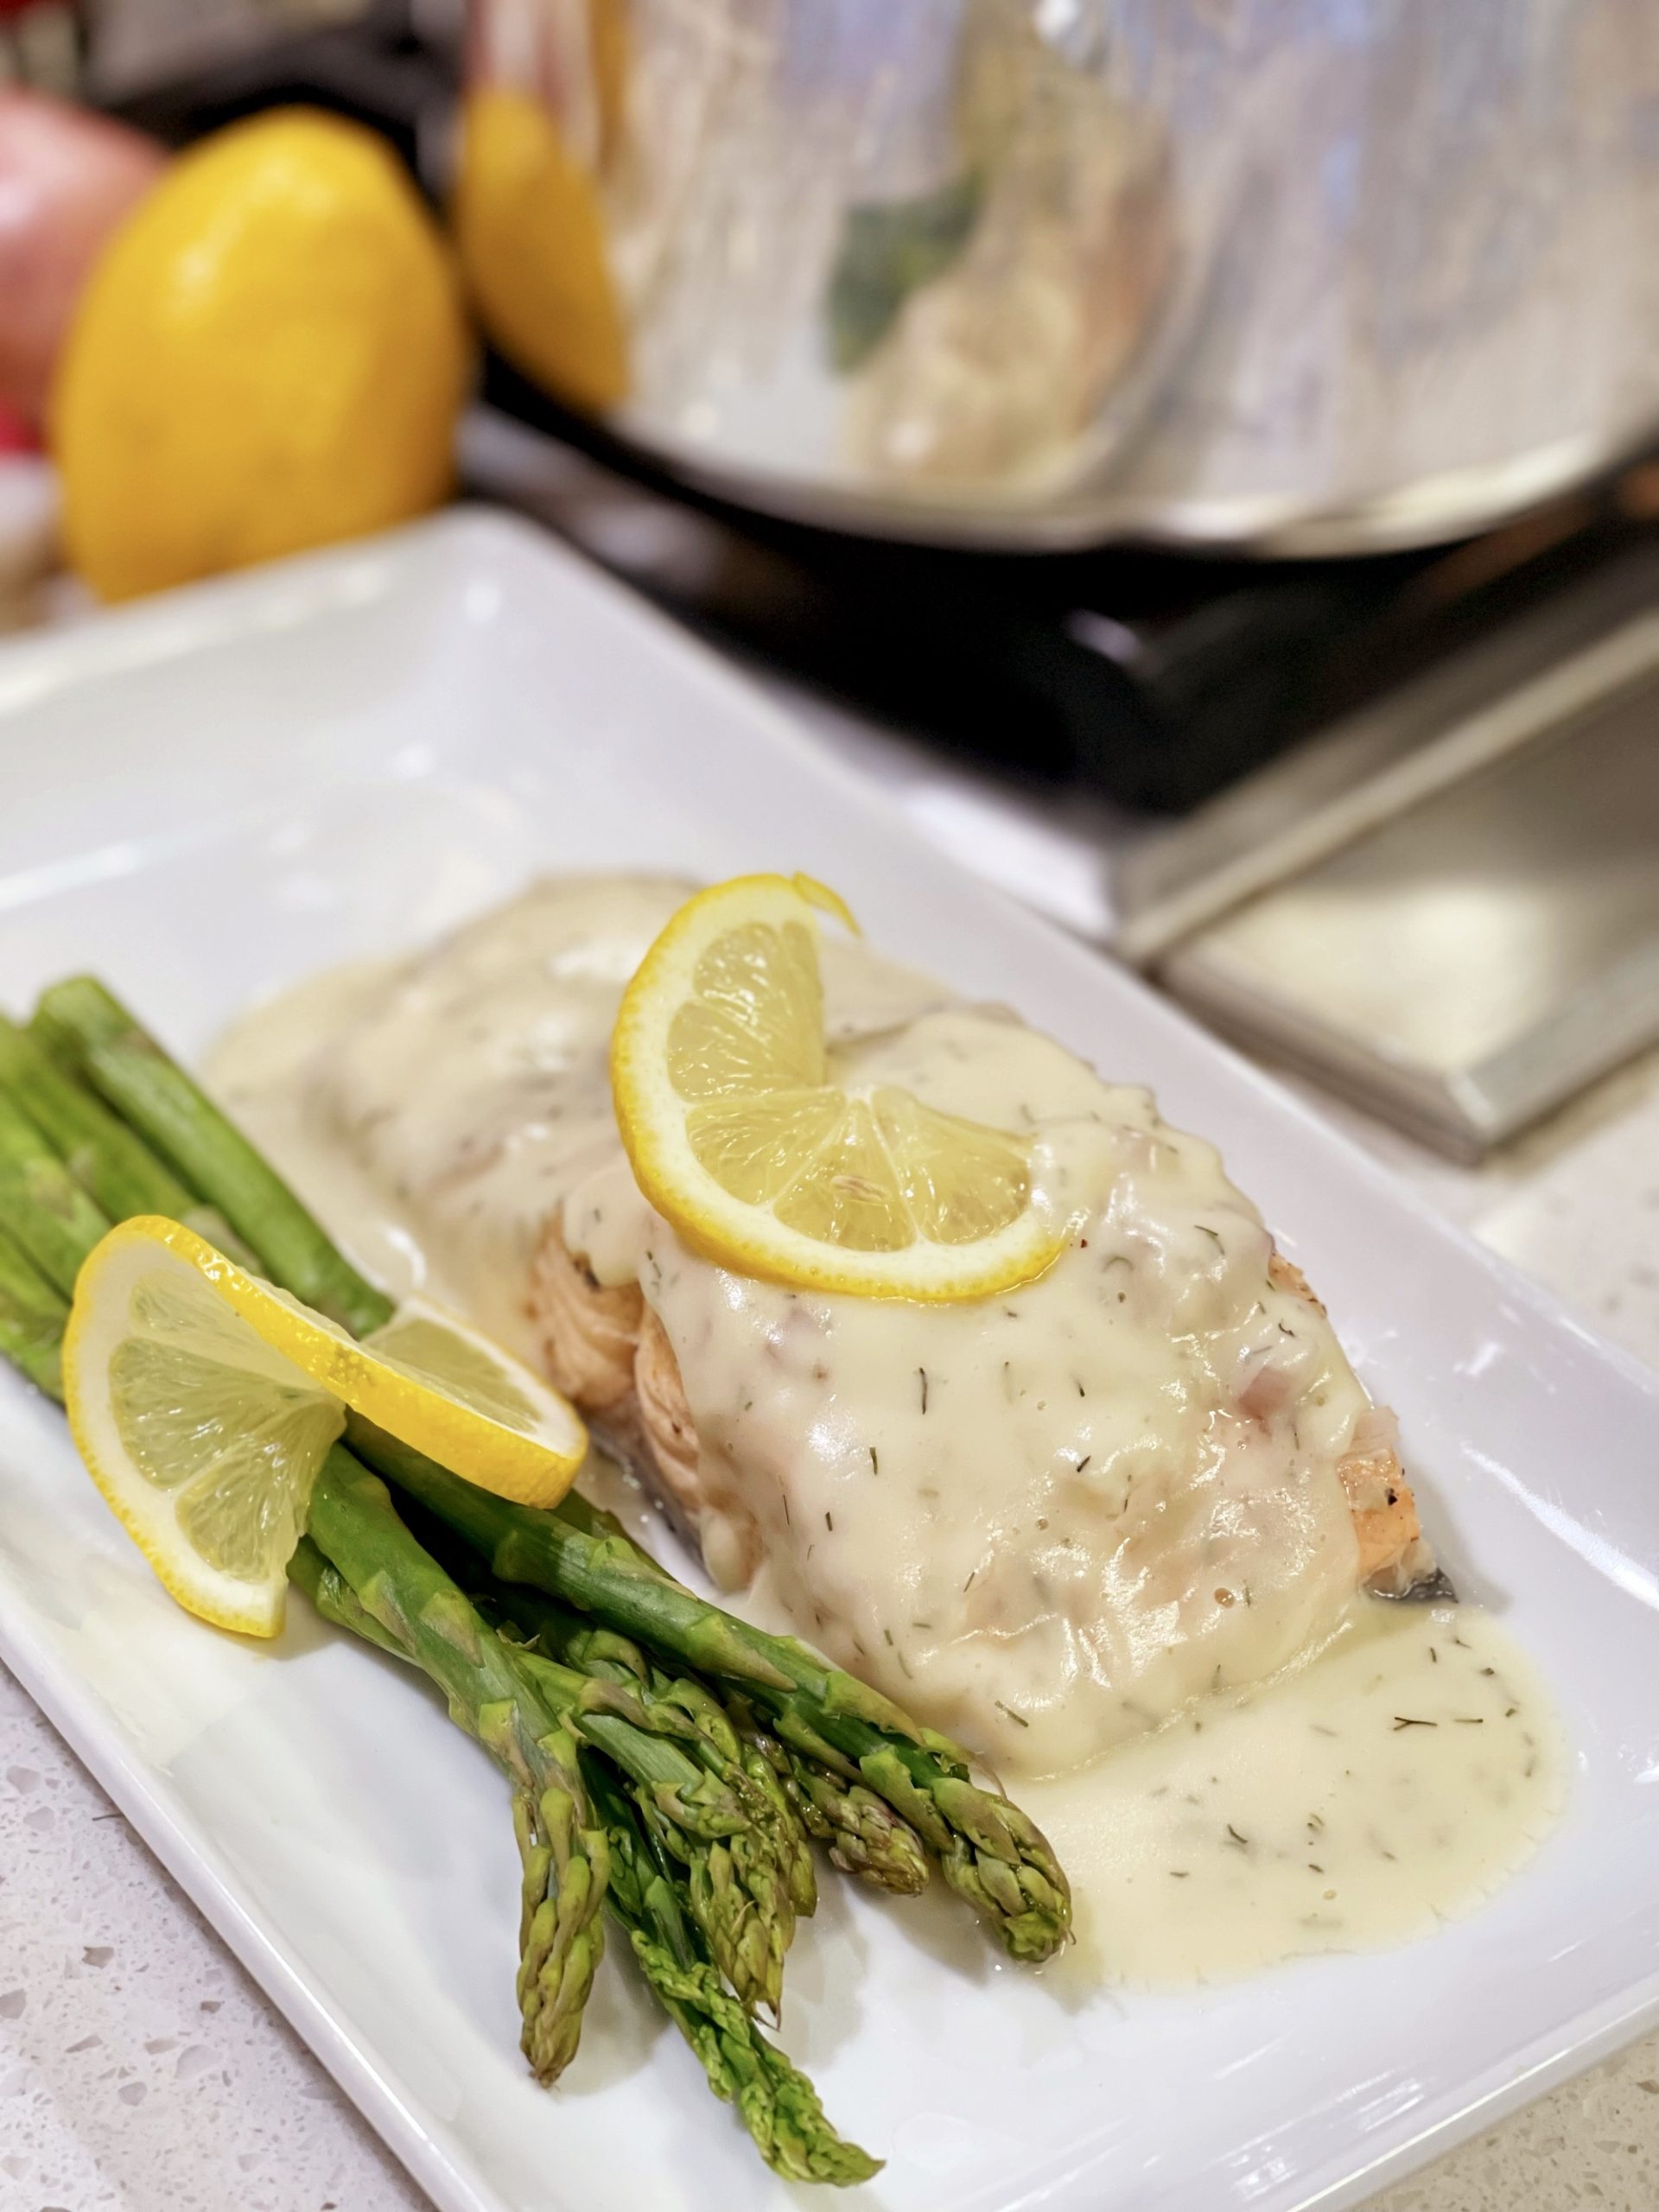 Shallow Poached bryan Lemon chef Salmon with a Veloute Sauce cooking with Dill 